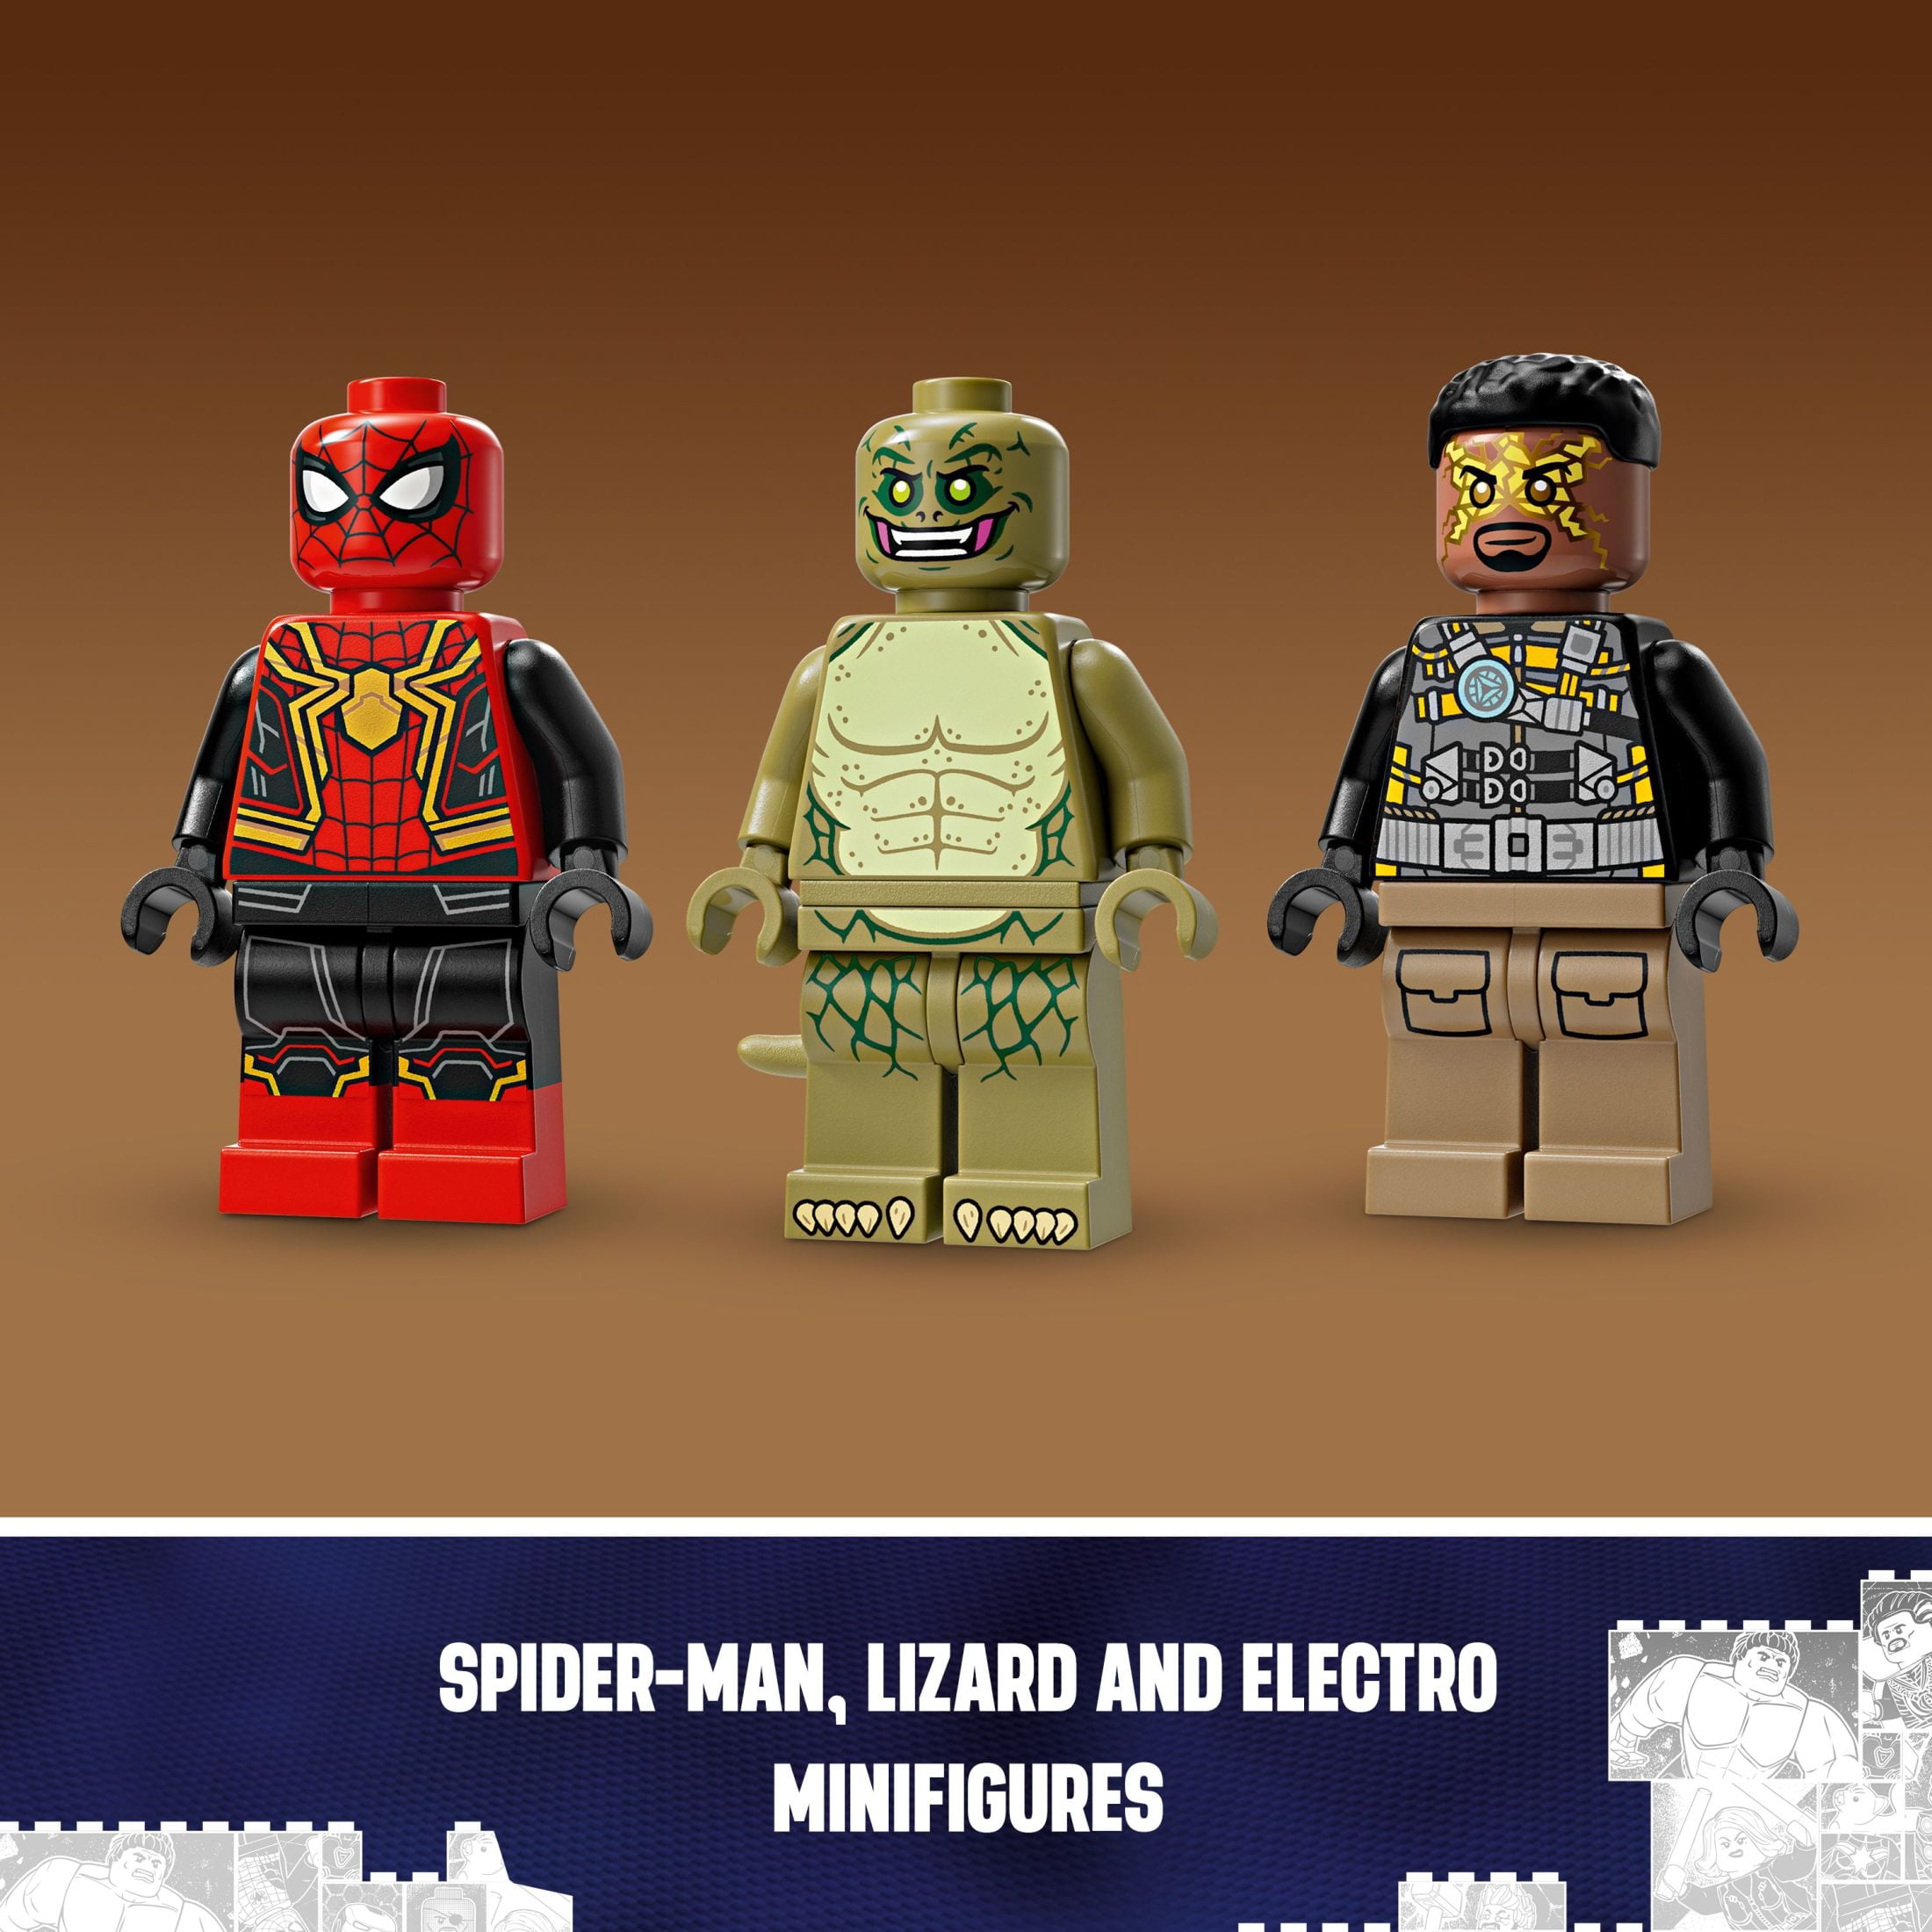 LEGO Spider-Man No Way Home - Sandman and Electro Show Up